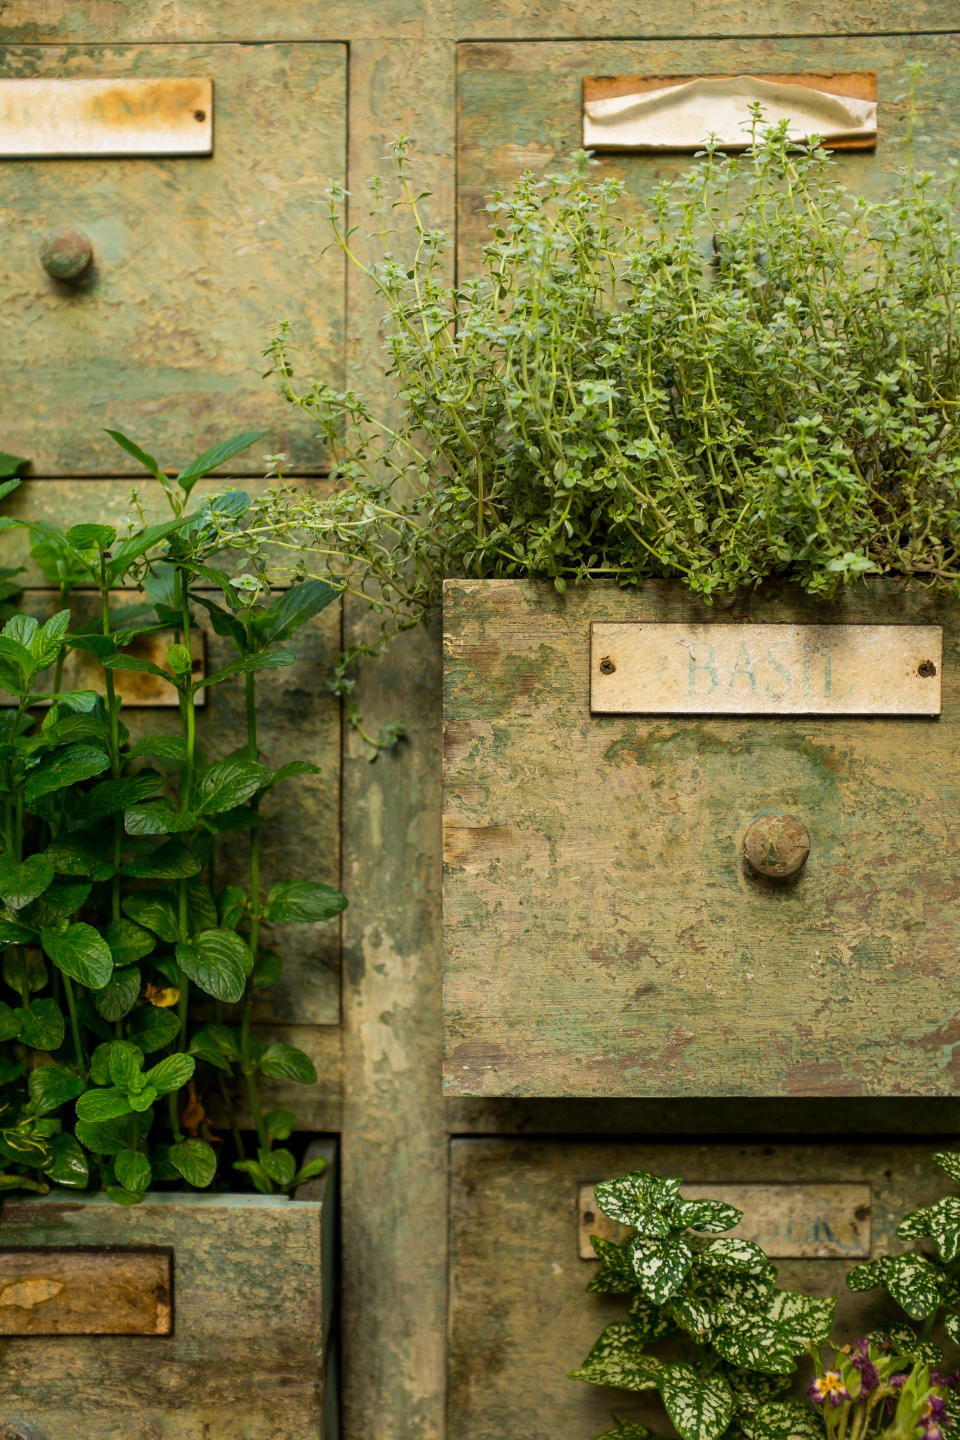 <p> There is nothing we like more than upcycling a vintage chest to turn it into a stylish planter. Bric a brac and junk shops are great places to search for pieces that can be planted up for one of the best herb garden ideas that&apos;s very &apos;of the moment&apos;. </p> <p> The latest upcycling look is giving old chests and cupboards a new lease of life. It&apos;s a big trend on Instagram and Pinterest, where you&apos;ll find plenty of inspiration if want to take your upcycling game to the next level.&#xA0; </p> <p> The more vintage the finish the better if you want to show off your plants in a quirky way, so go for wood that looks &apos;distressed&apos;. </p>